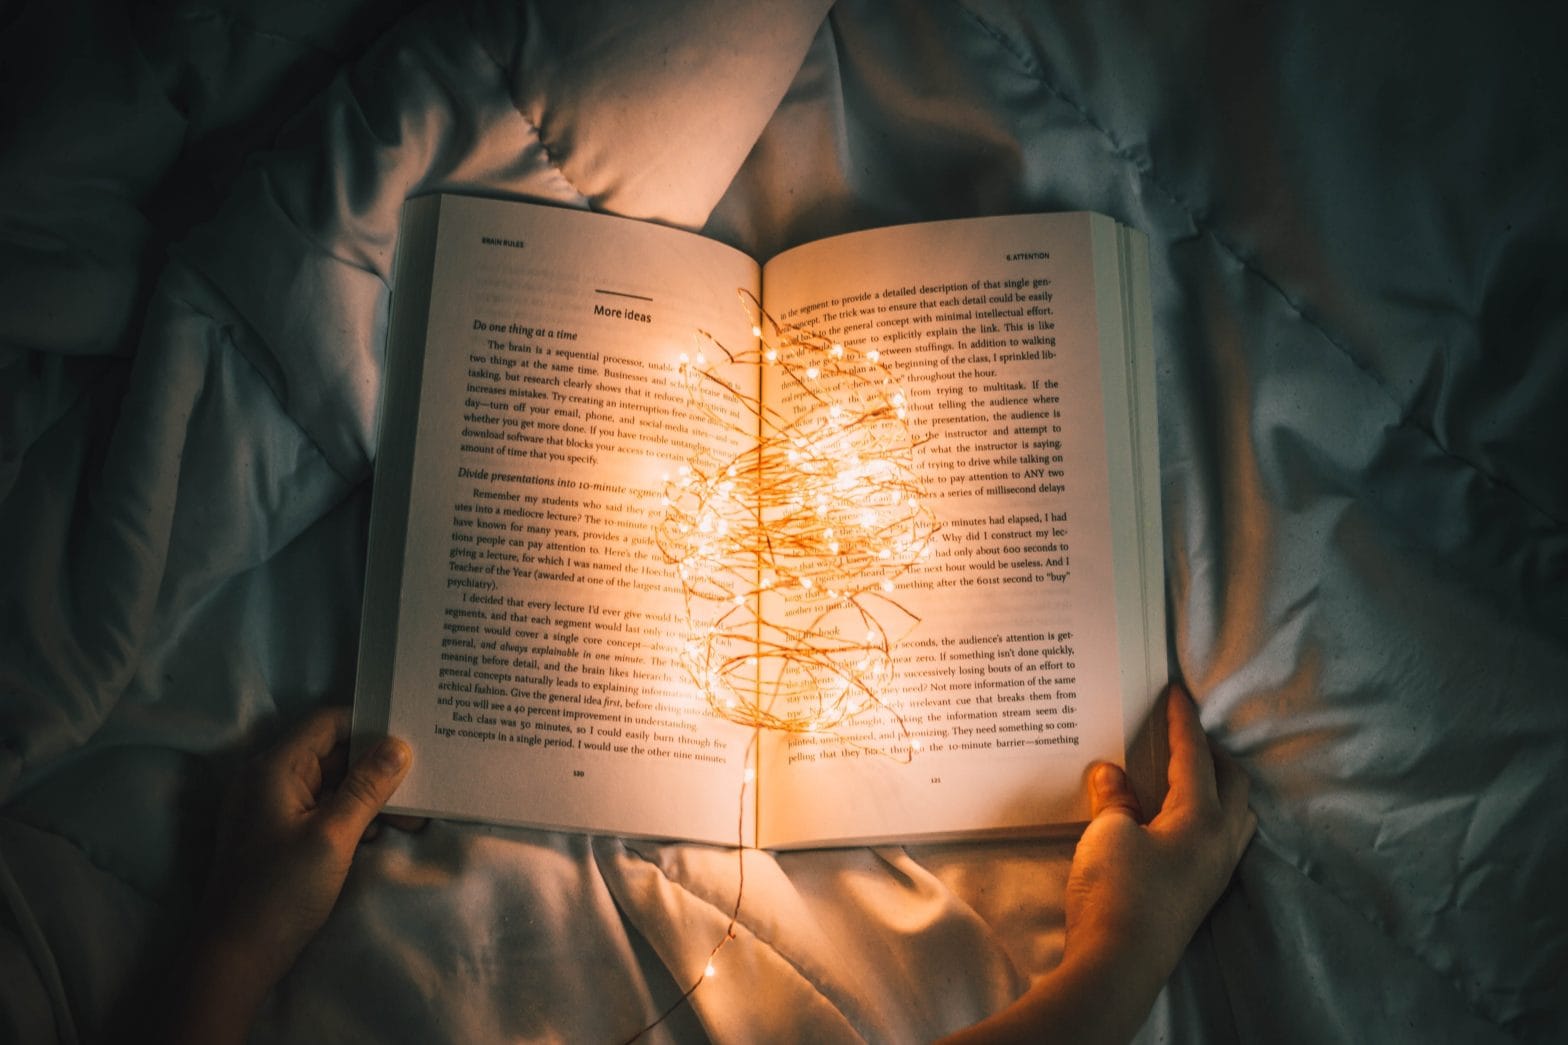 A book that is lit up with bright lights that illuminate the pages